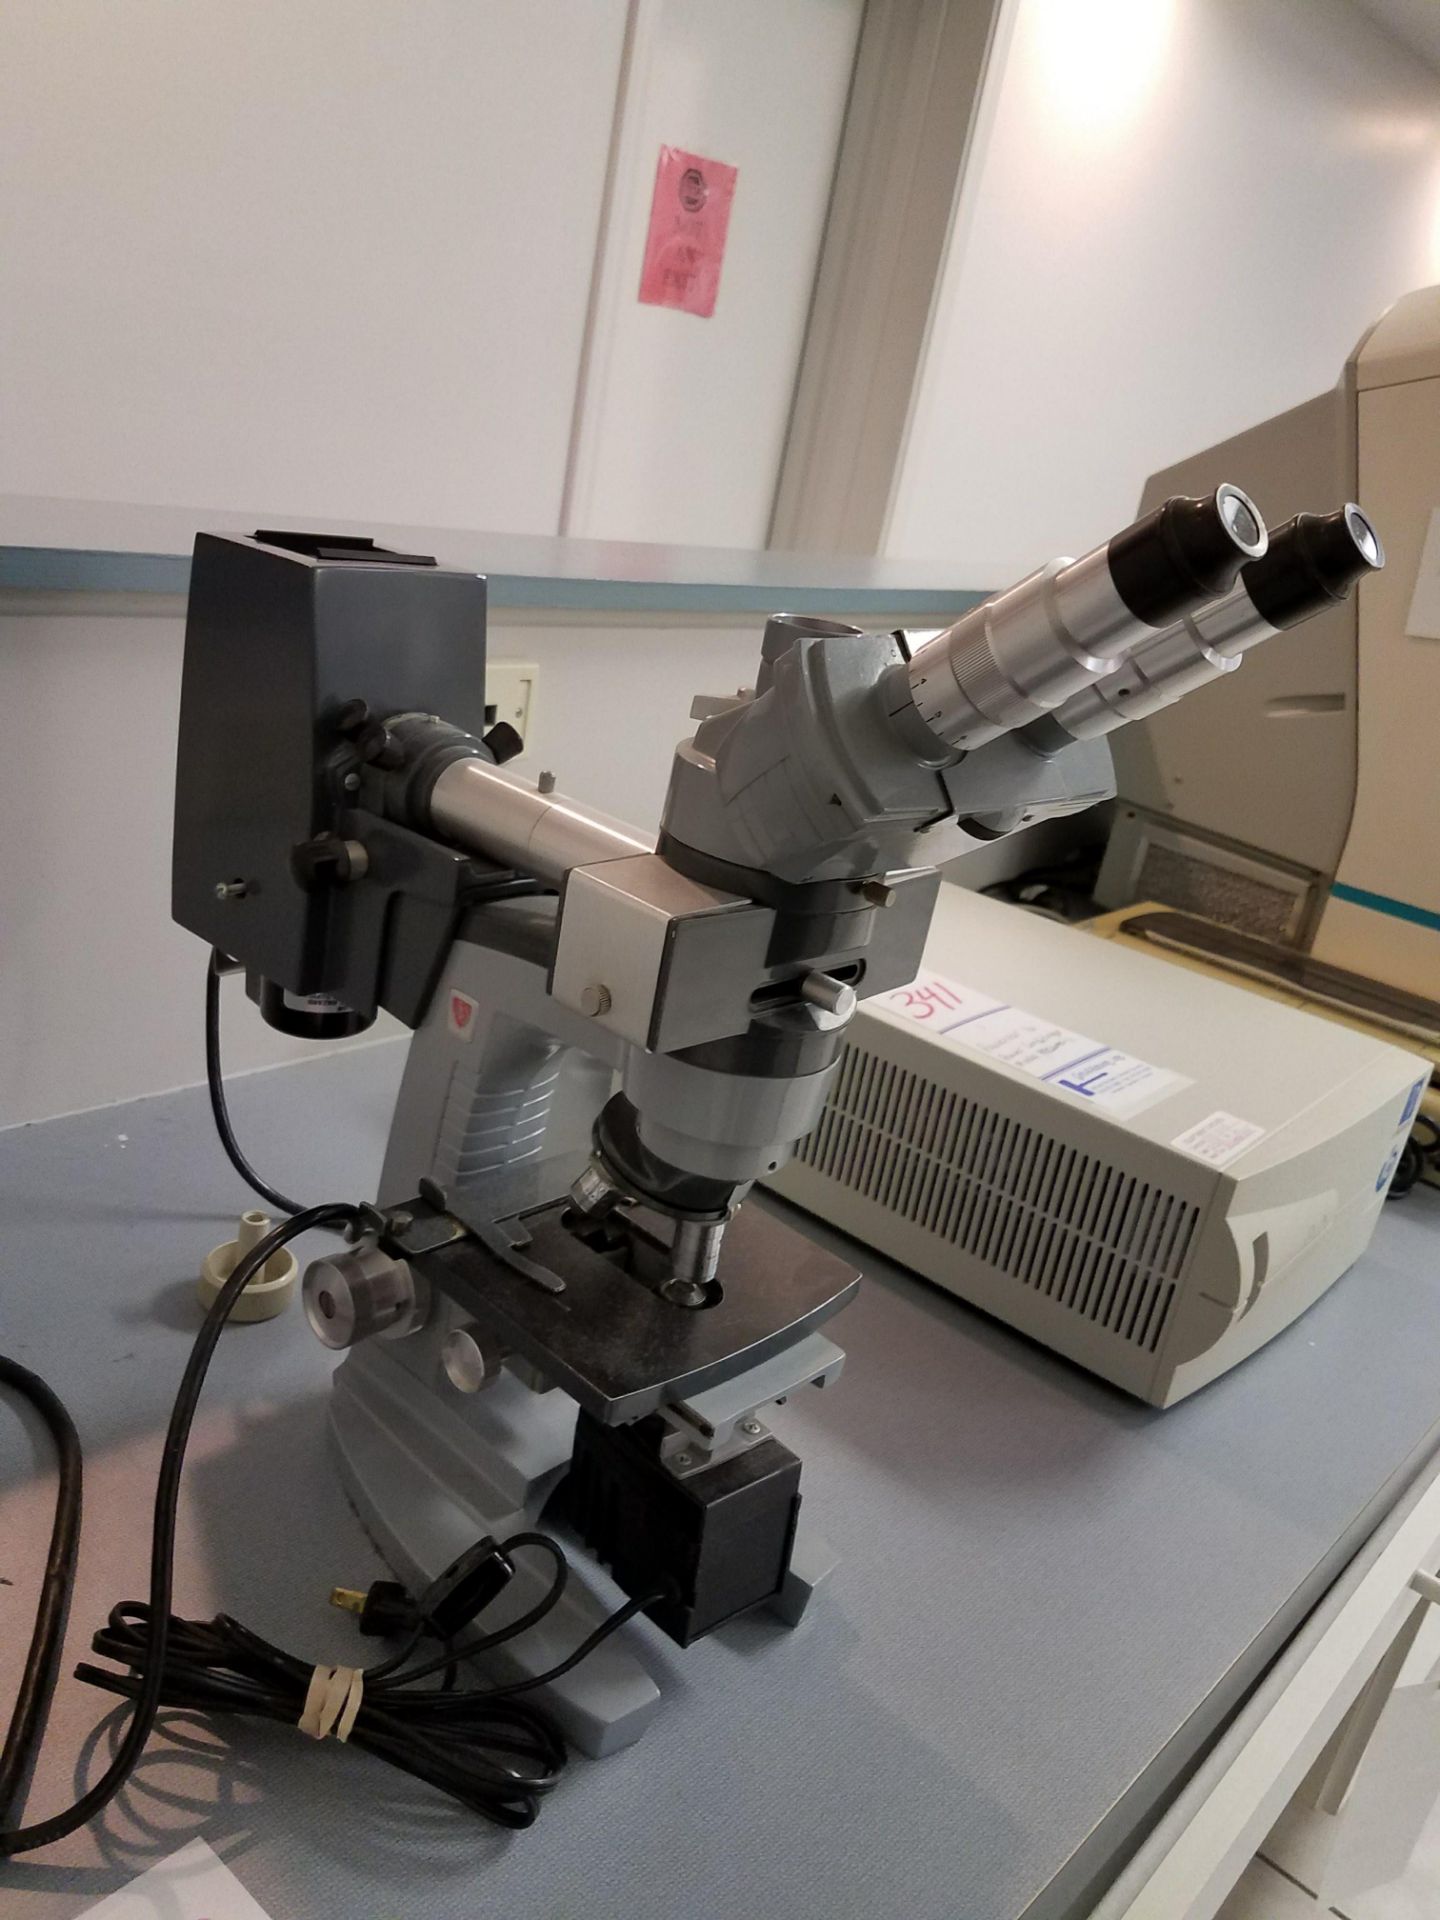 1 AMERICAN OPTICAL SPENCER MICROSCOPE w/ VERTICAL FLUORESCENCE MODEL 2071 - Image 4 of 4